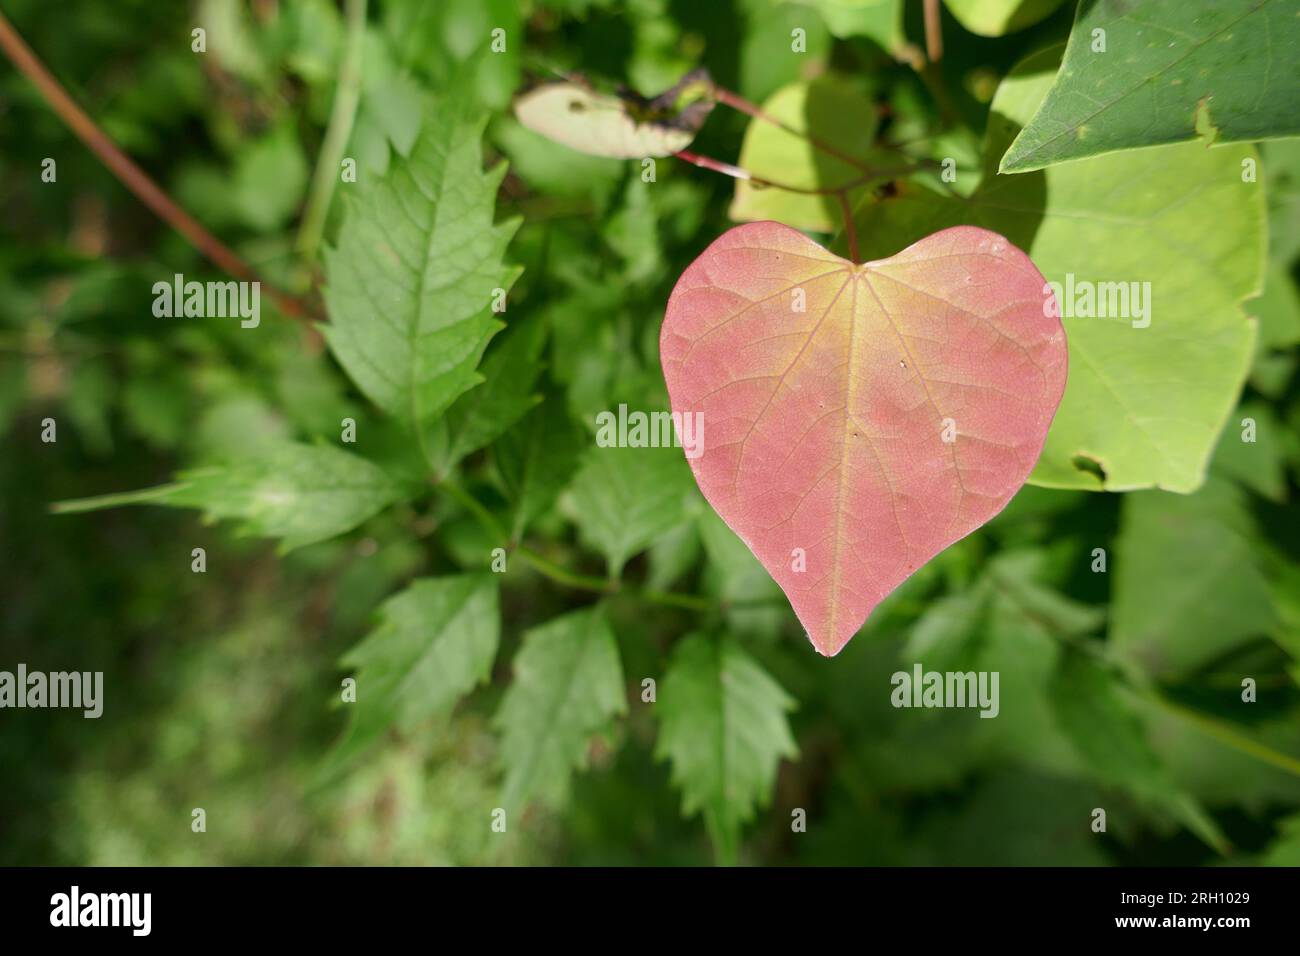 Heart shaped red leaf among other green leaves Stock Photo